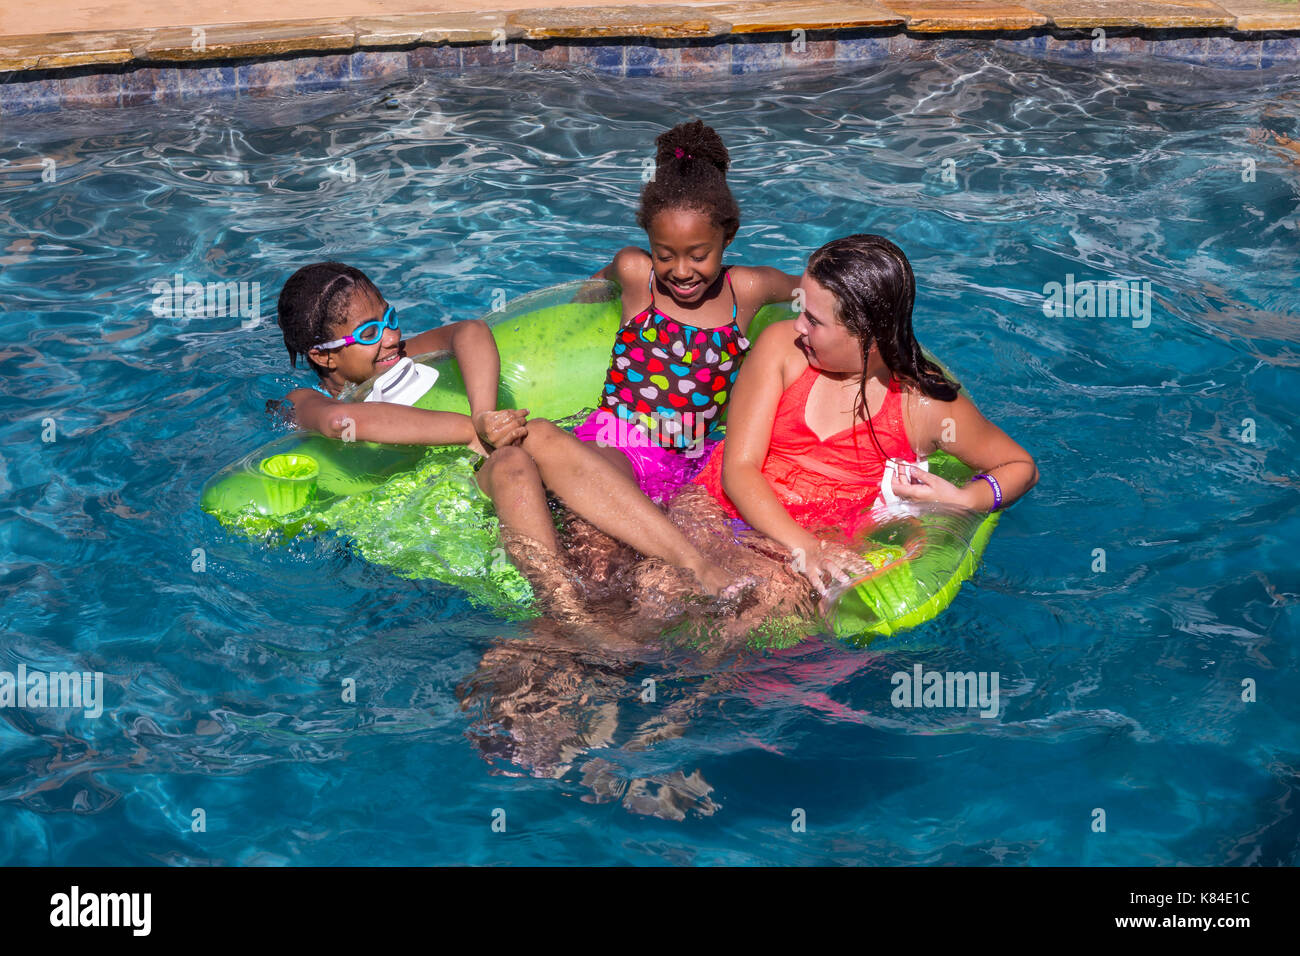 girls, children, swimmers, swimming, swimming pool, freshwater swimming pool, pool party, Castro Valley, Alameda County, California, United States Stock Photo